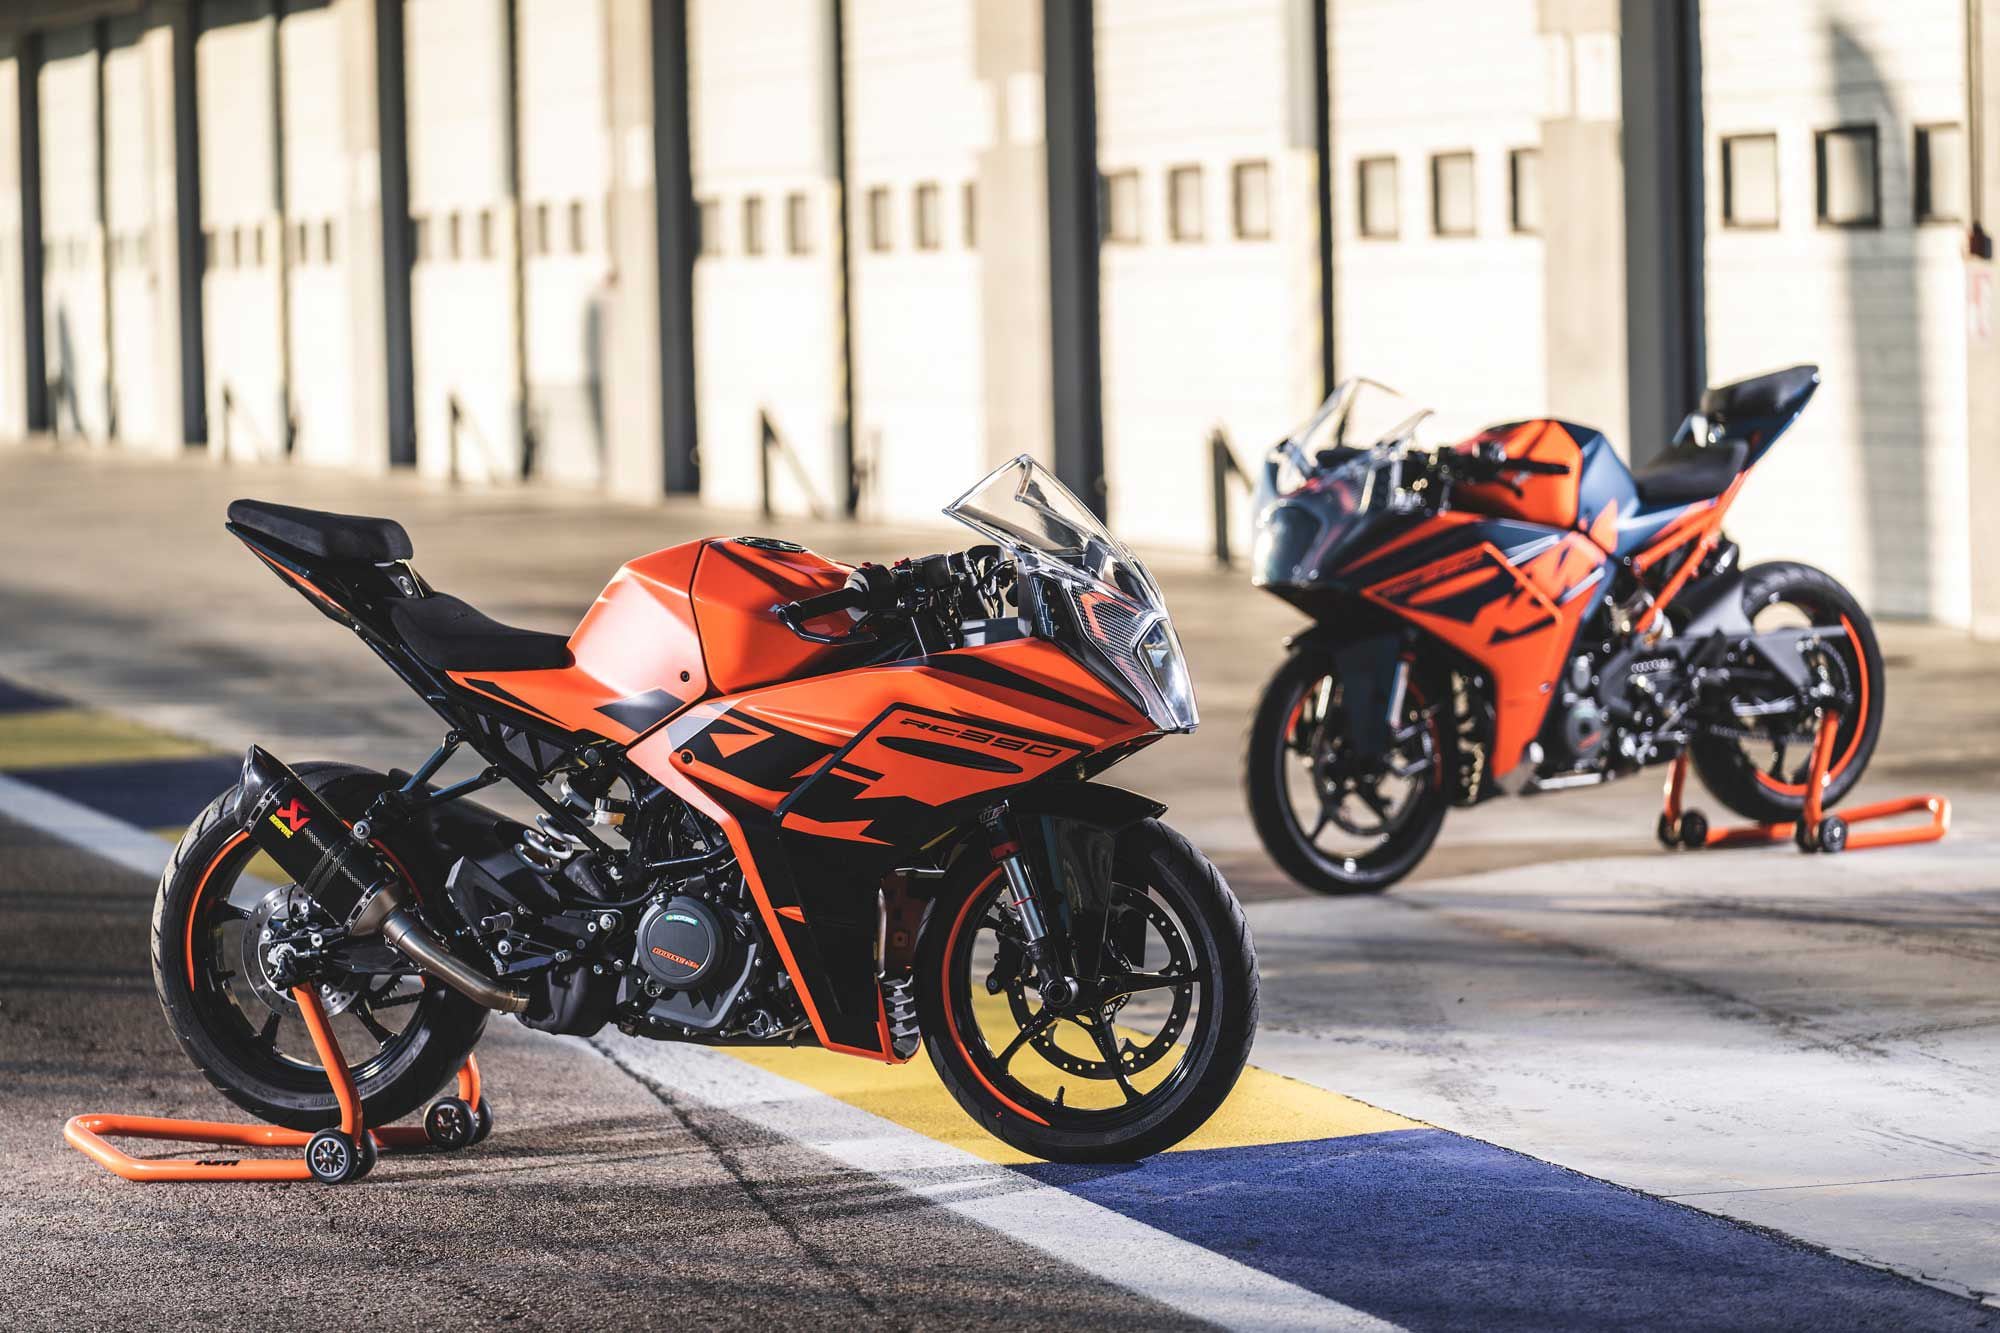 The 2022 KTM RC 390 ups its game with performance-minded changes and top-shelf components to reinstate its place near the top of the lightweight supersport category.